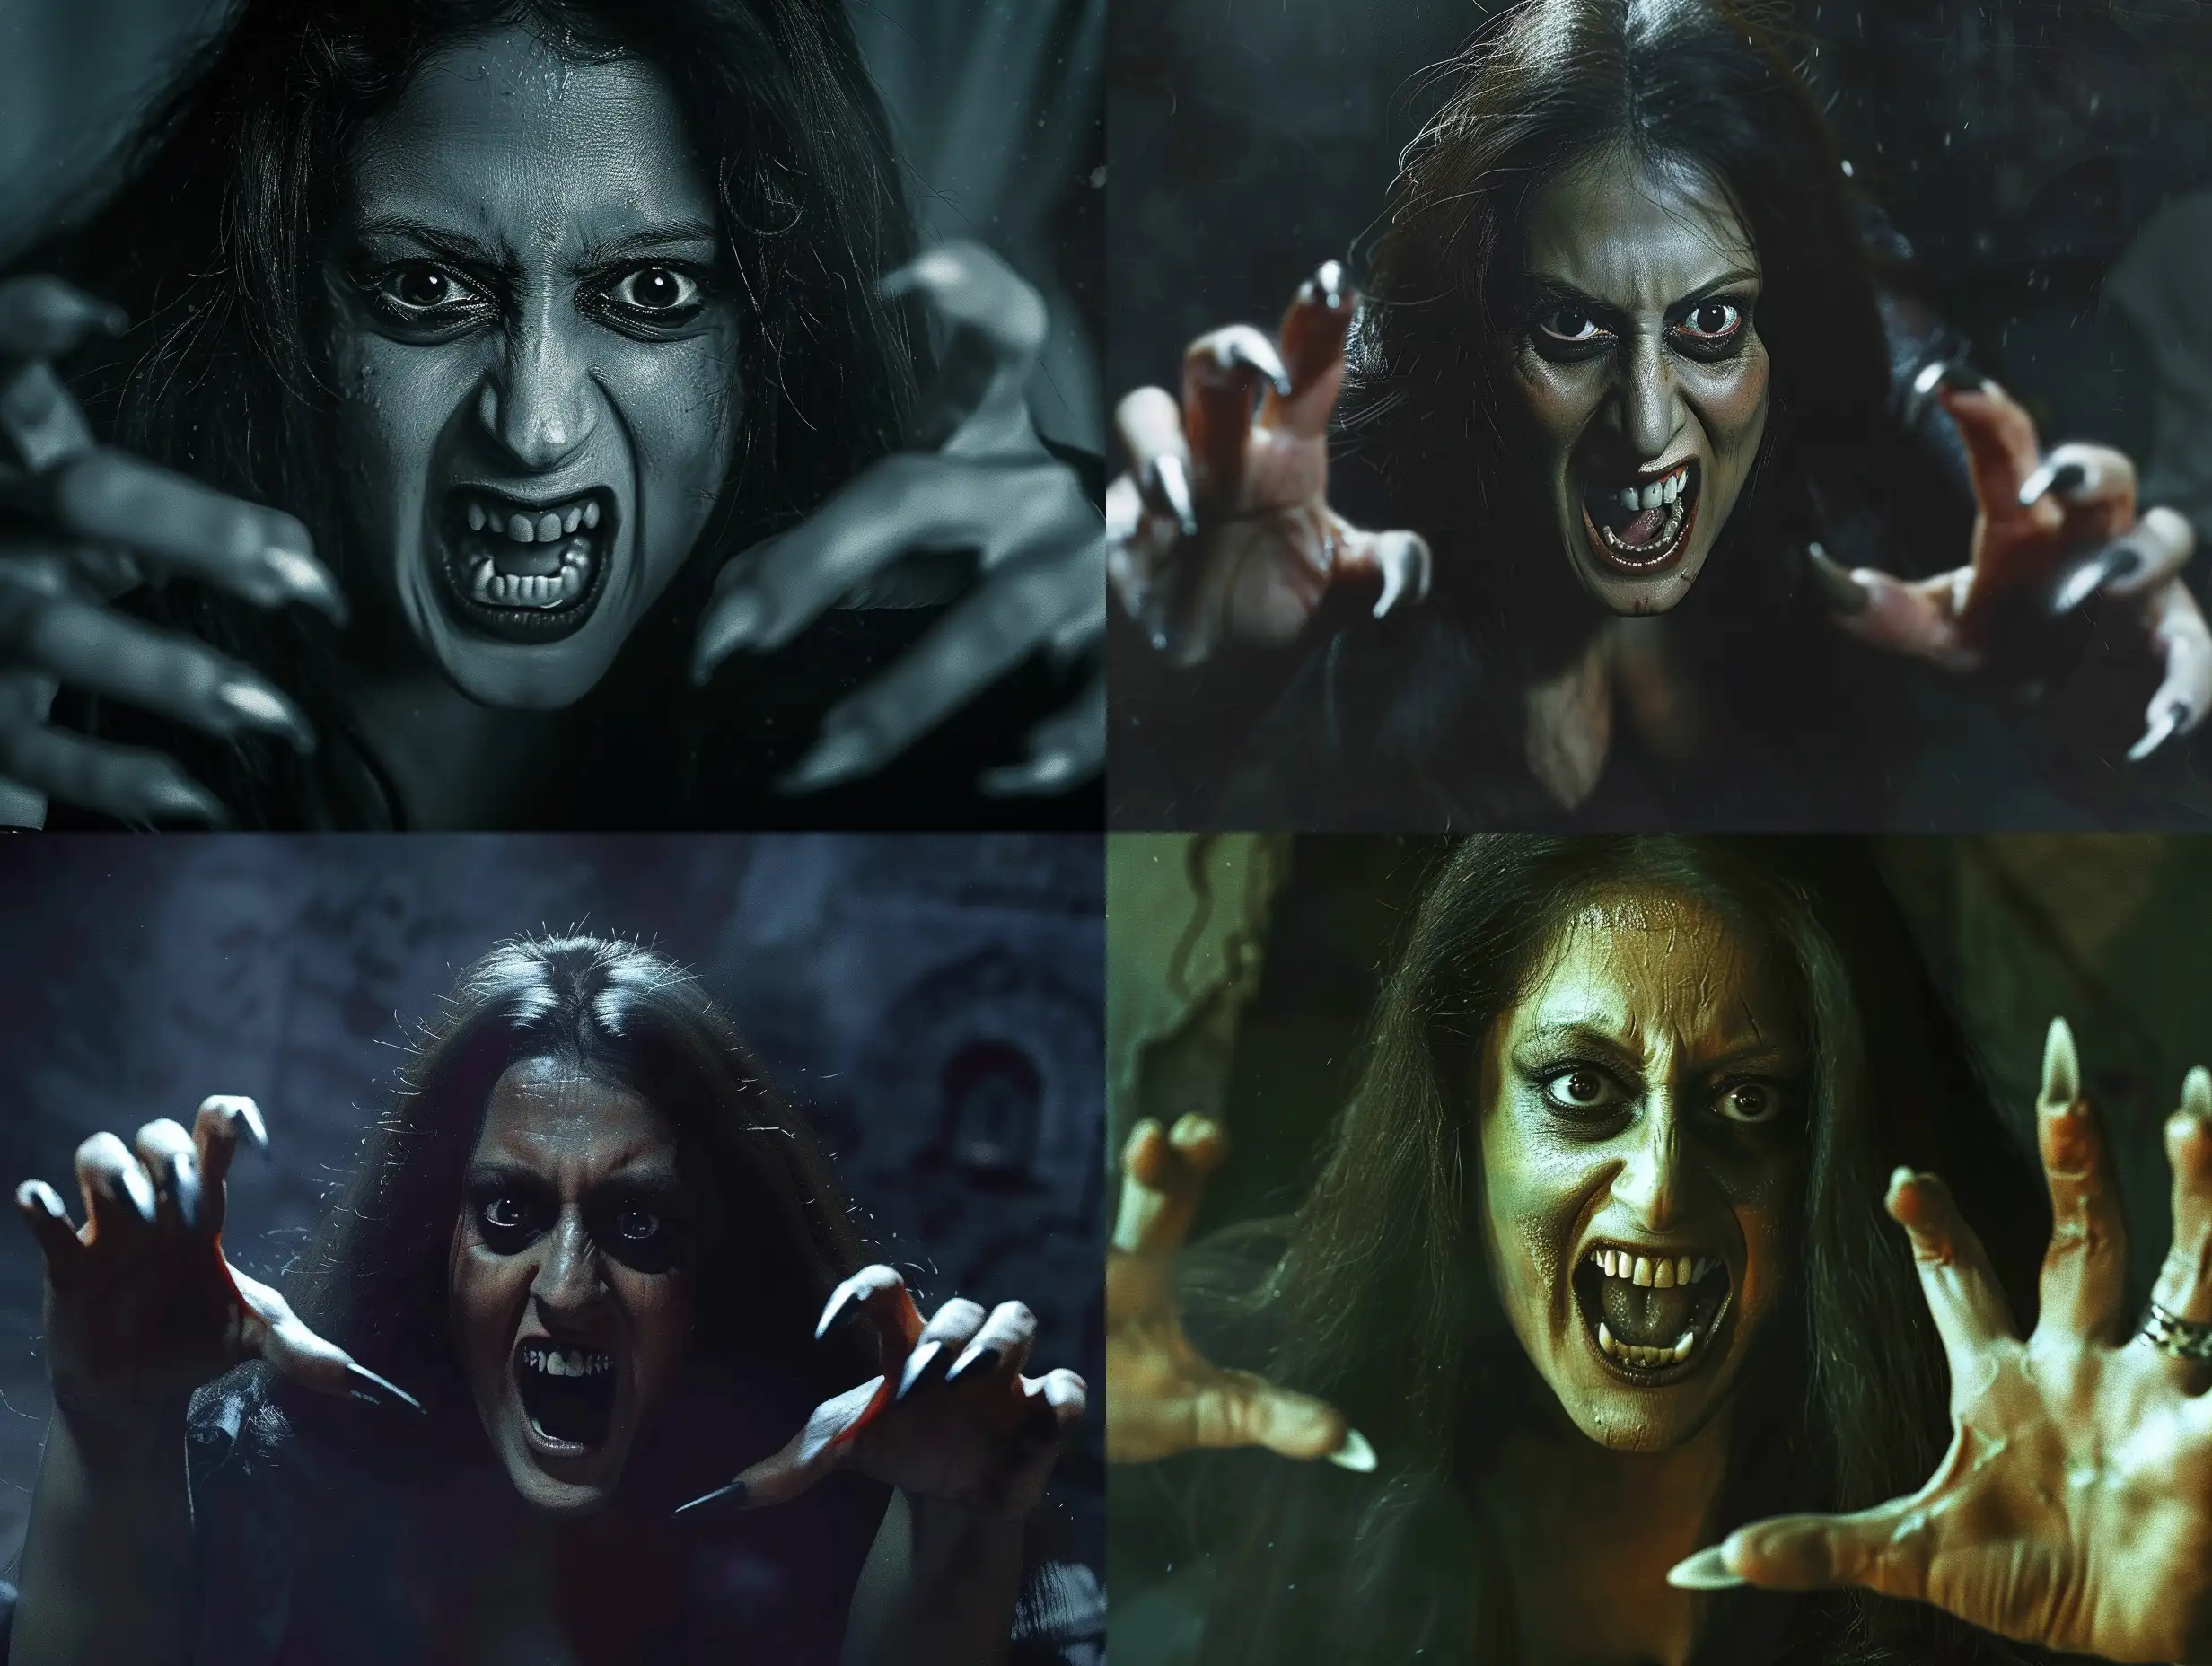 Eerie-Photorealistic-Scene-of-a-Monstrous-Vampire-Woman-Emerging-from-Darkness